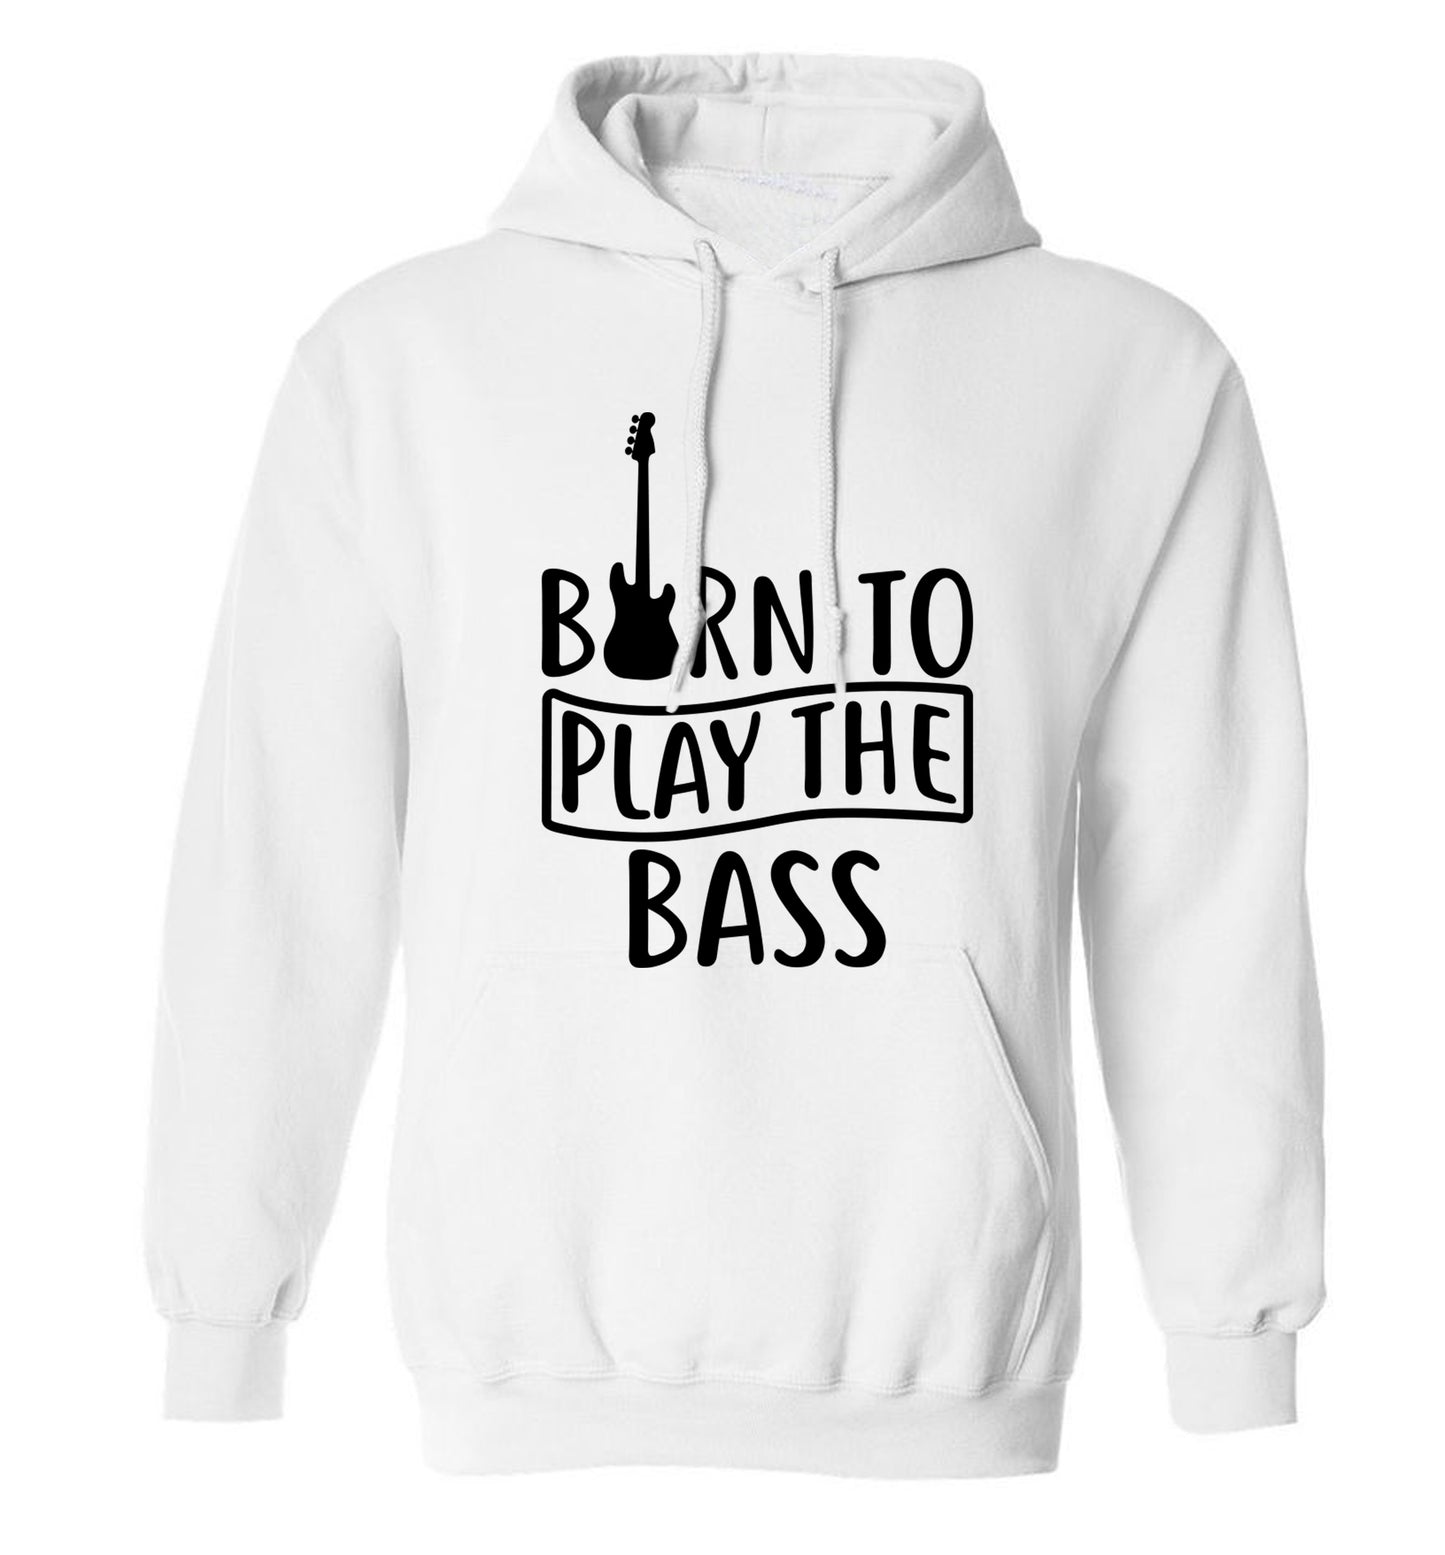 Born to play the bass adults unisex white hoodie 2XL